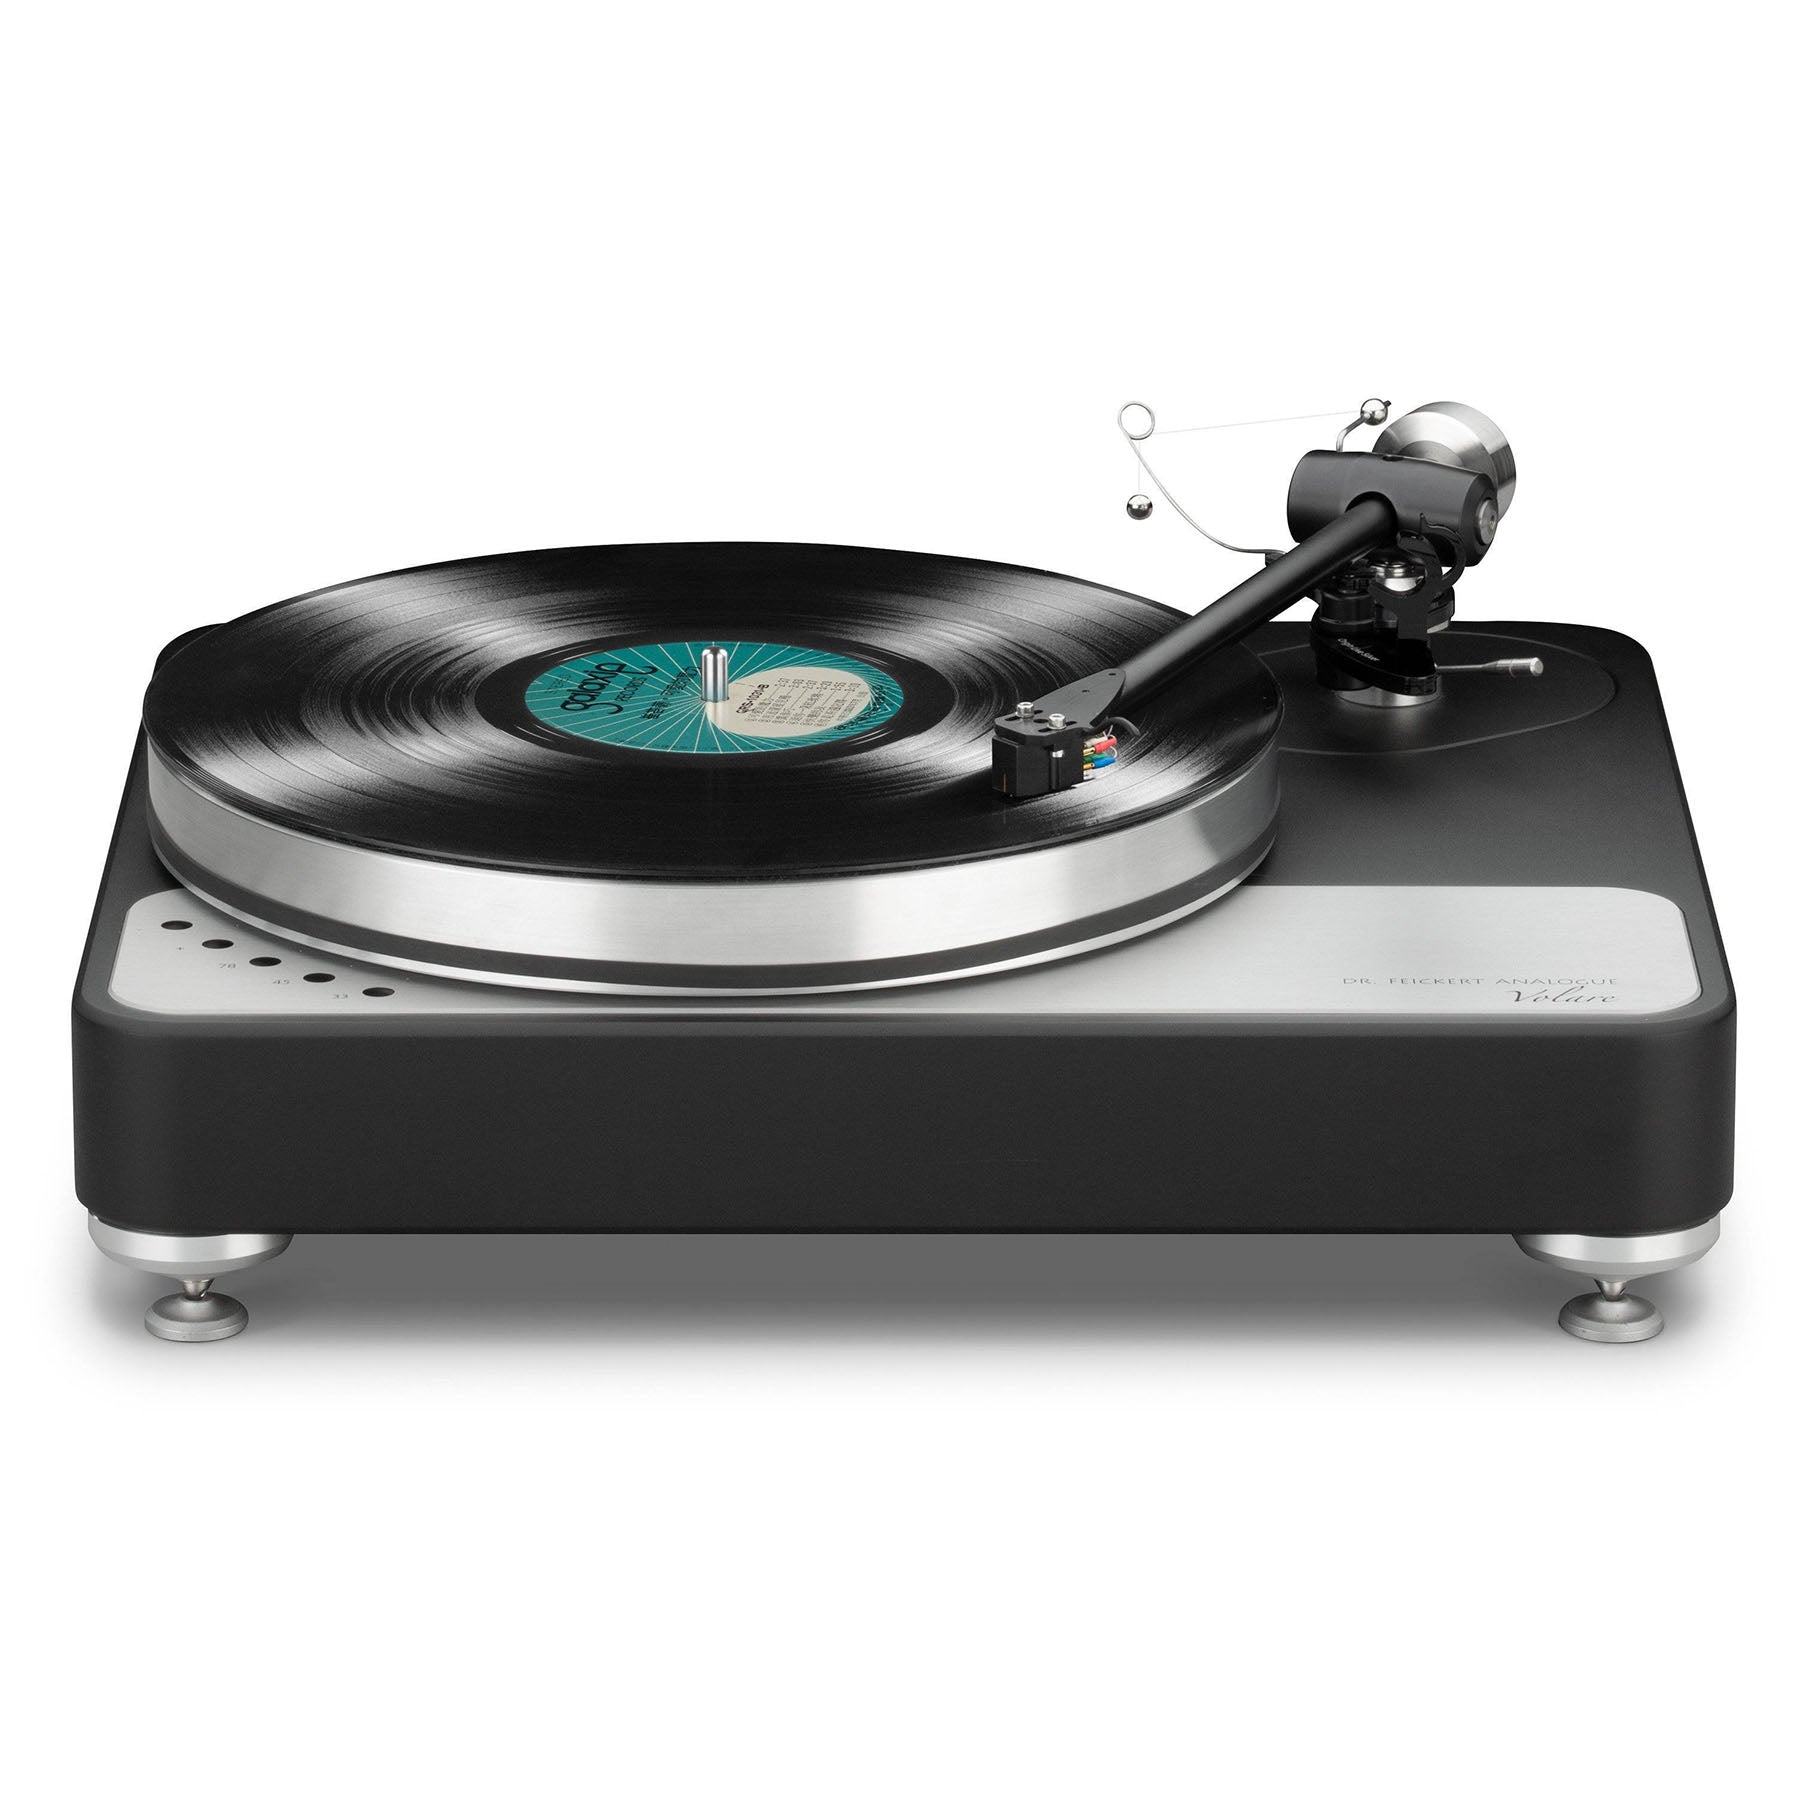 Dr. Feickert Analogue Volare Turntable